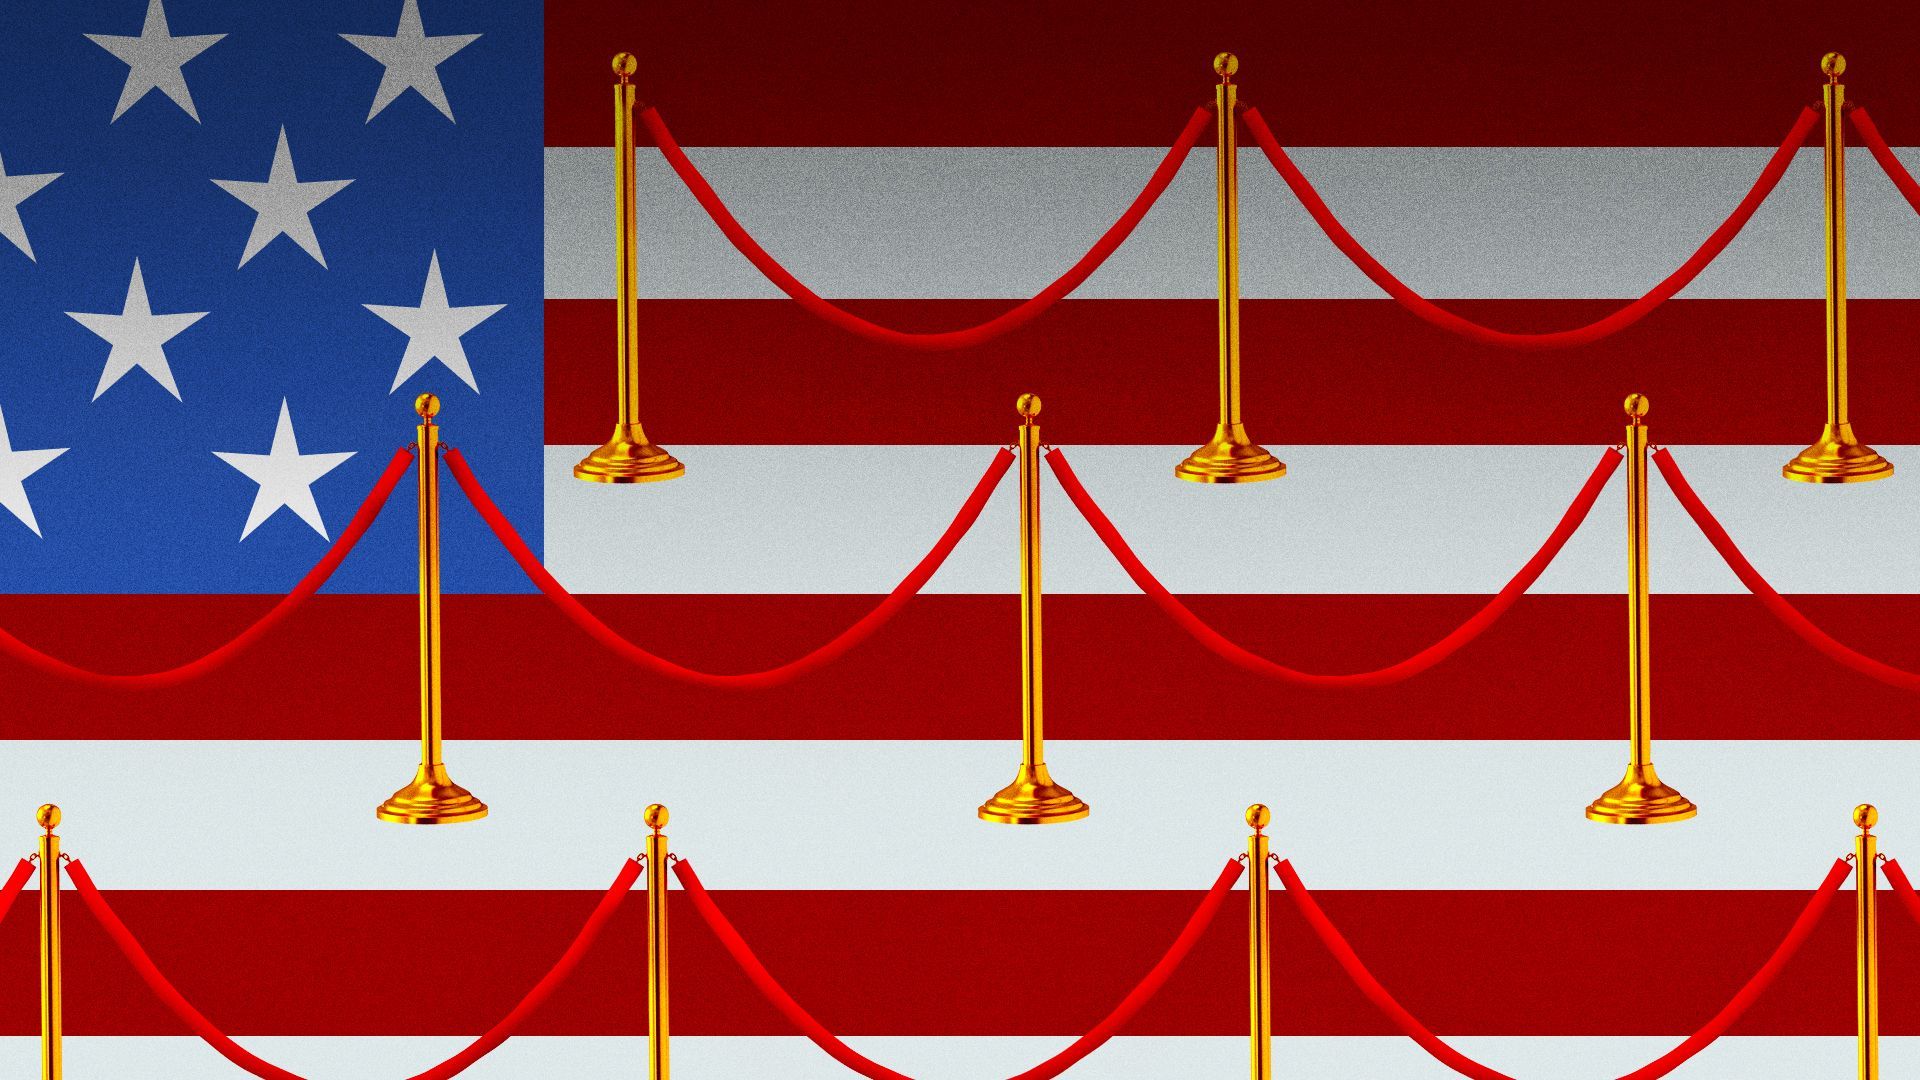 Illustration of the US flag with red carpets and velvet ropes forming the stripes.